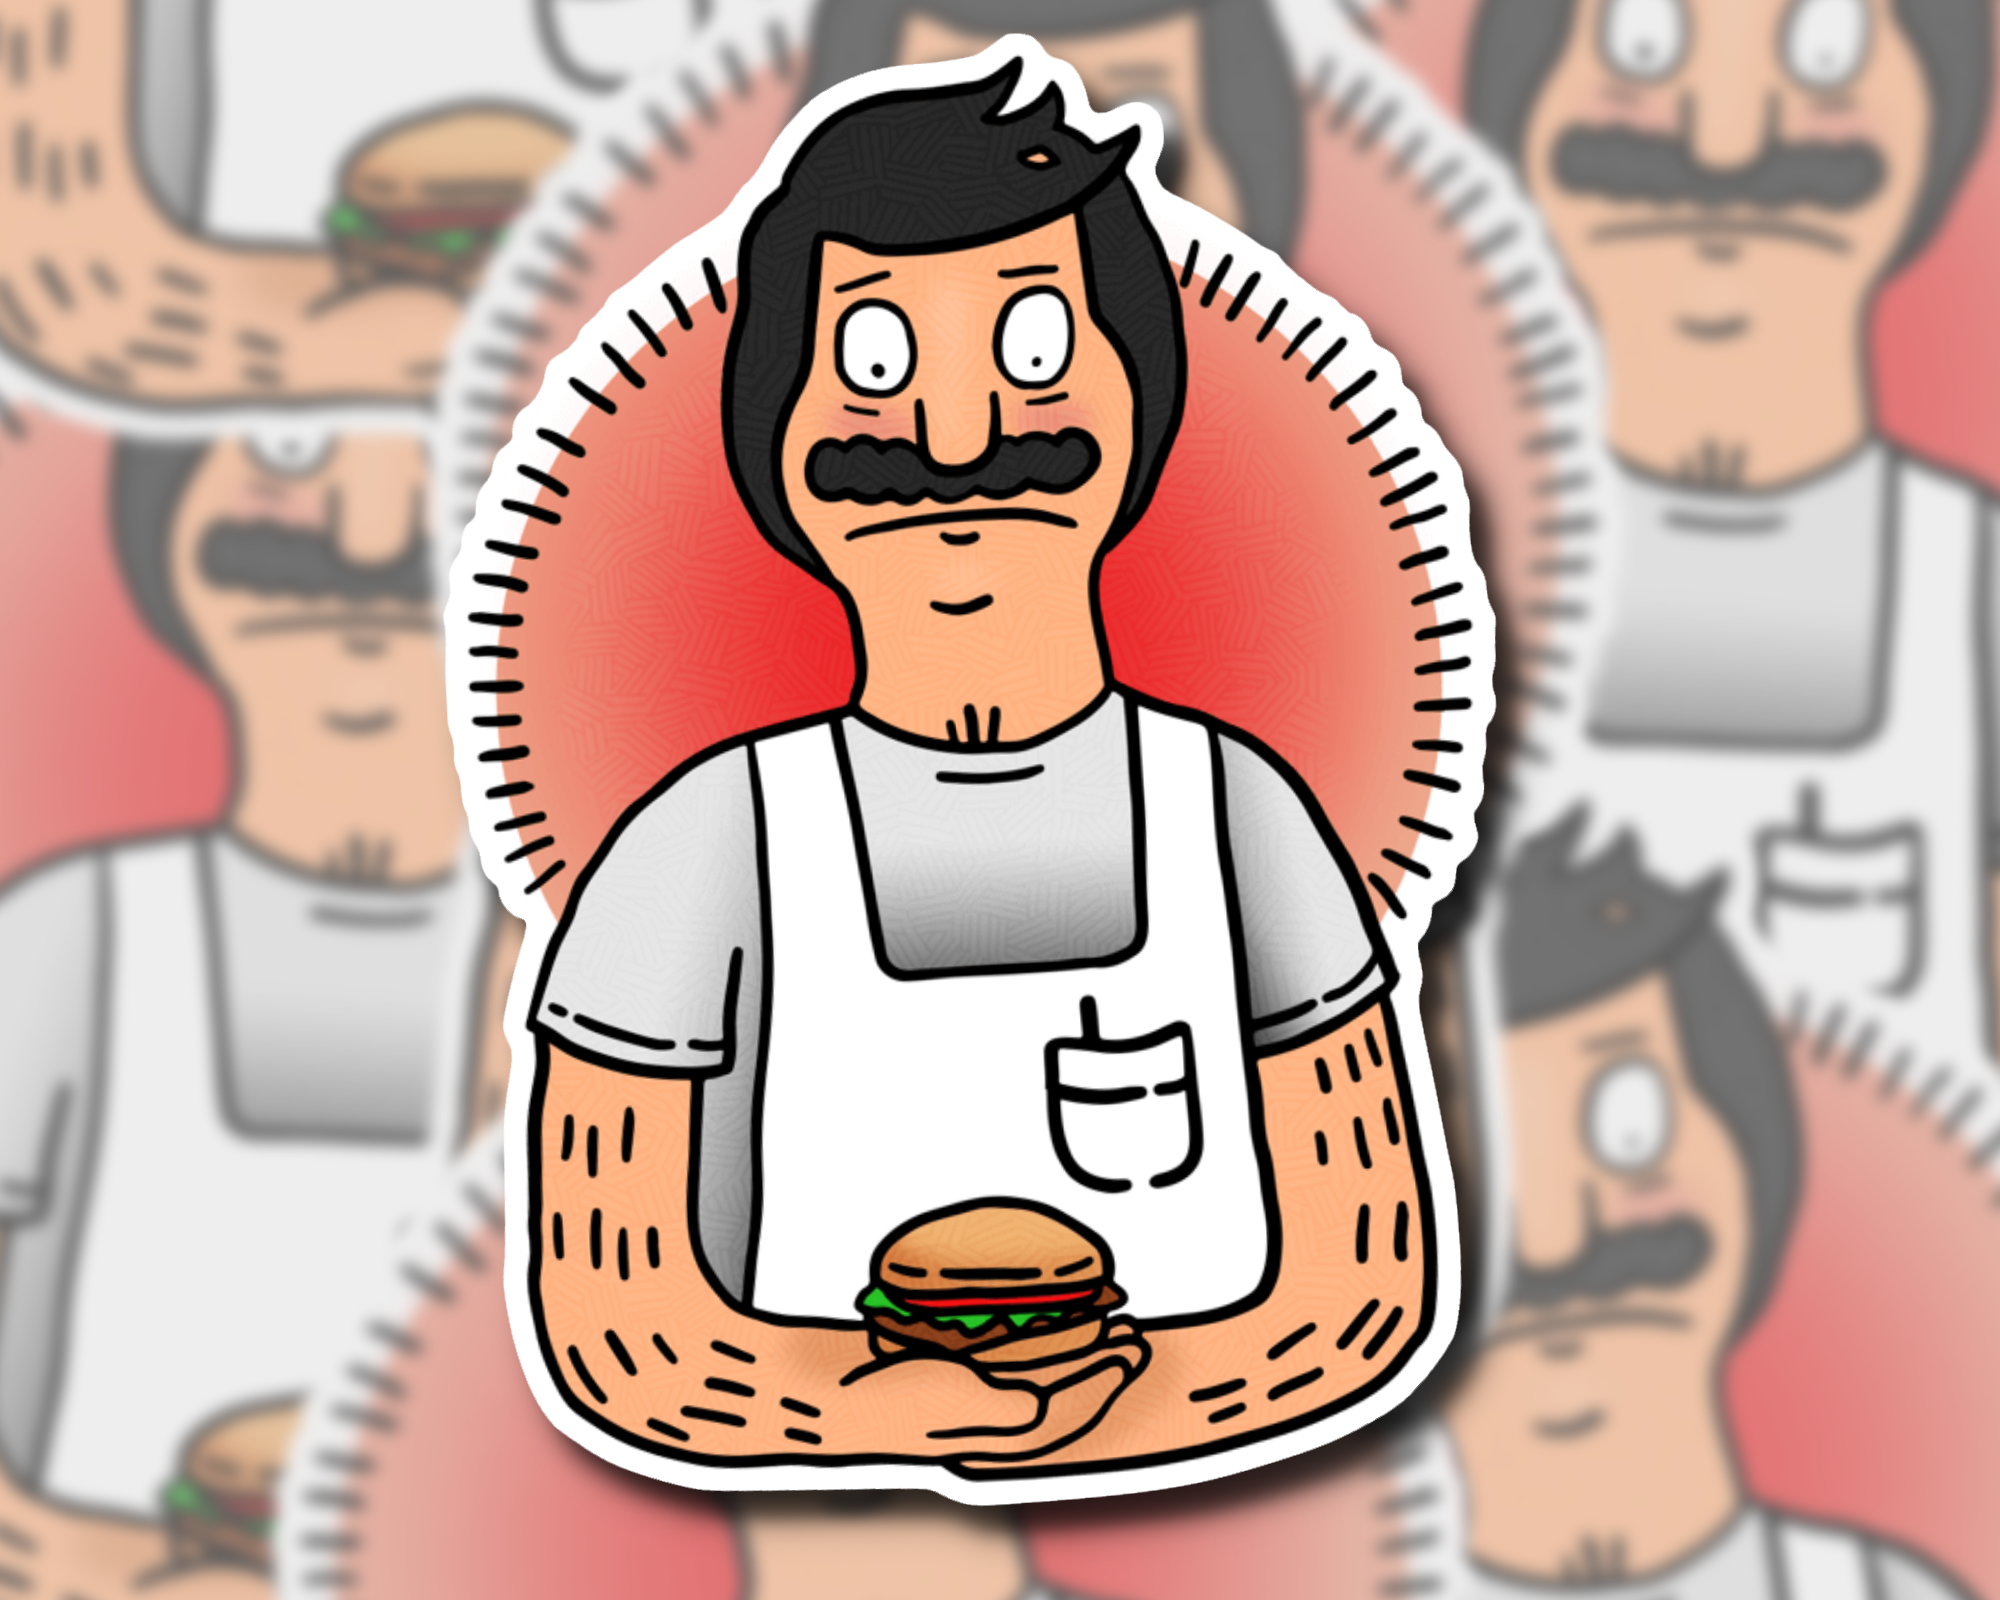 Bobs Burgers Tattoo Ideas  Cool Tattoos Inspired by Bobs Burgers